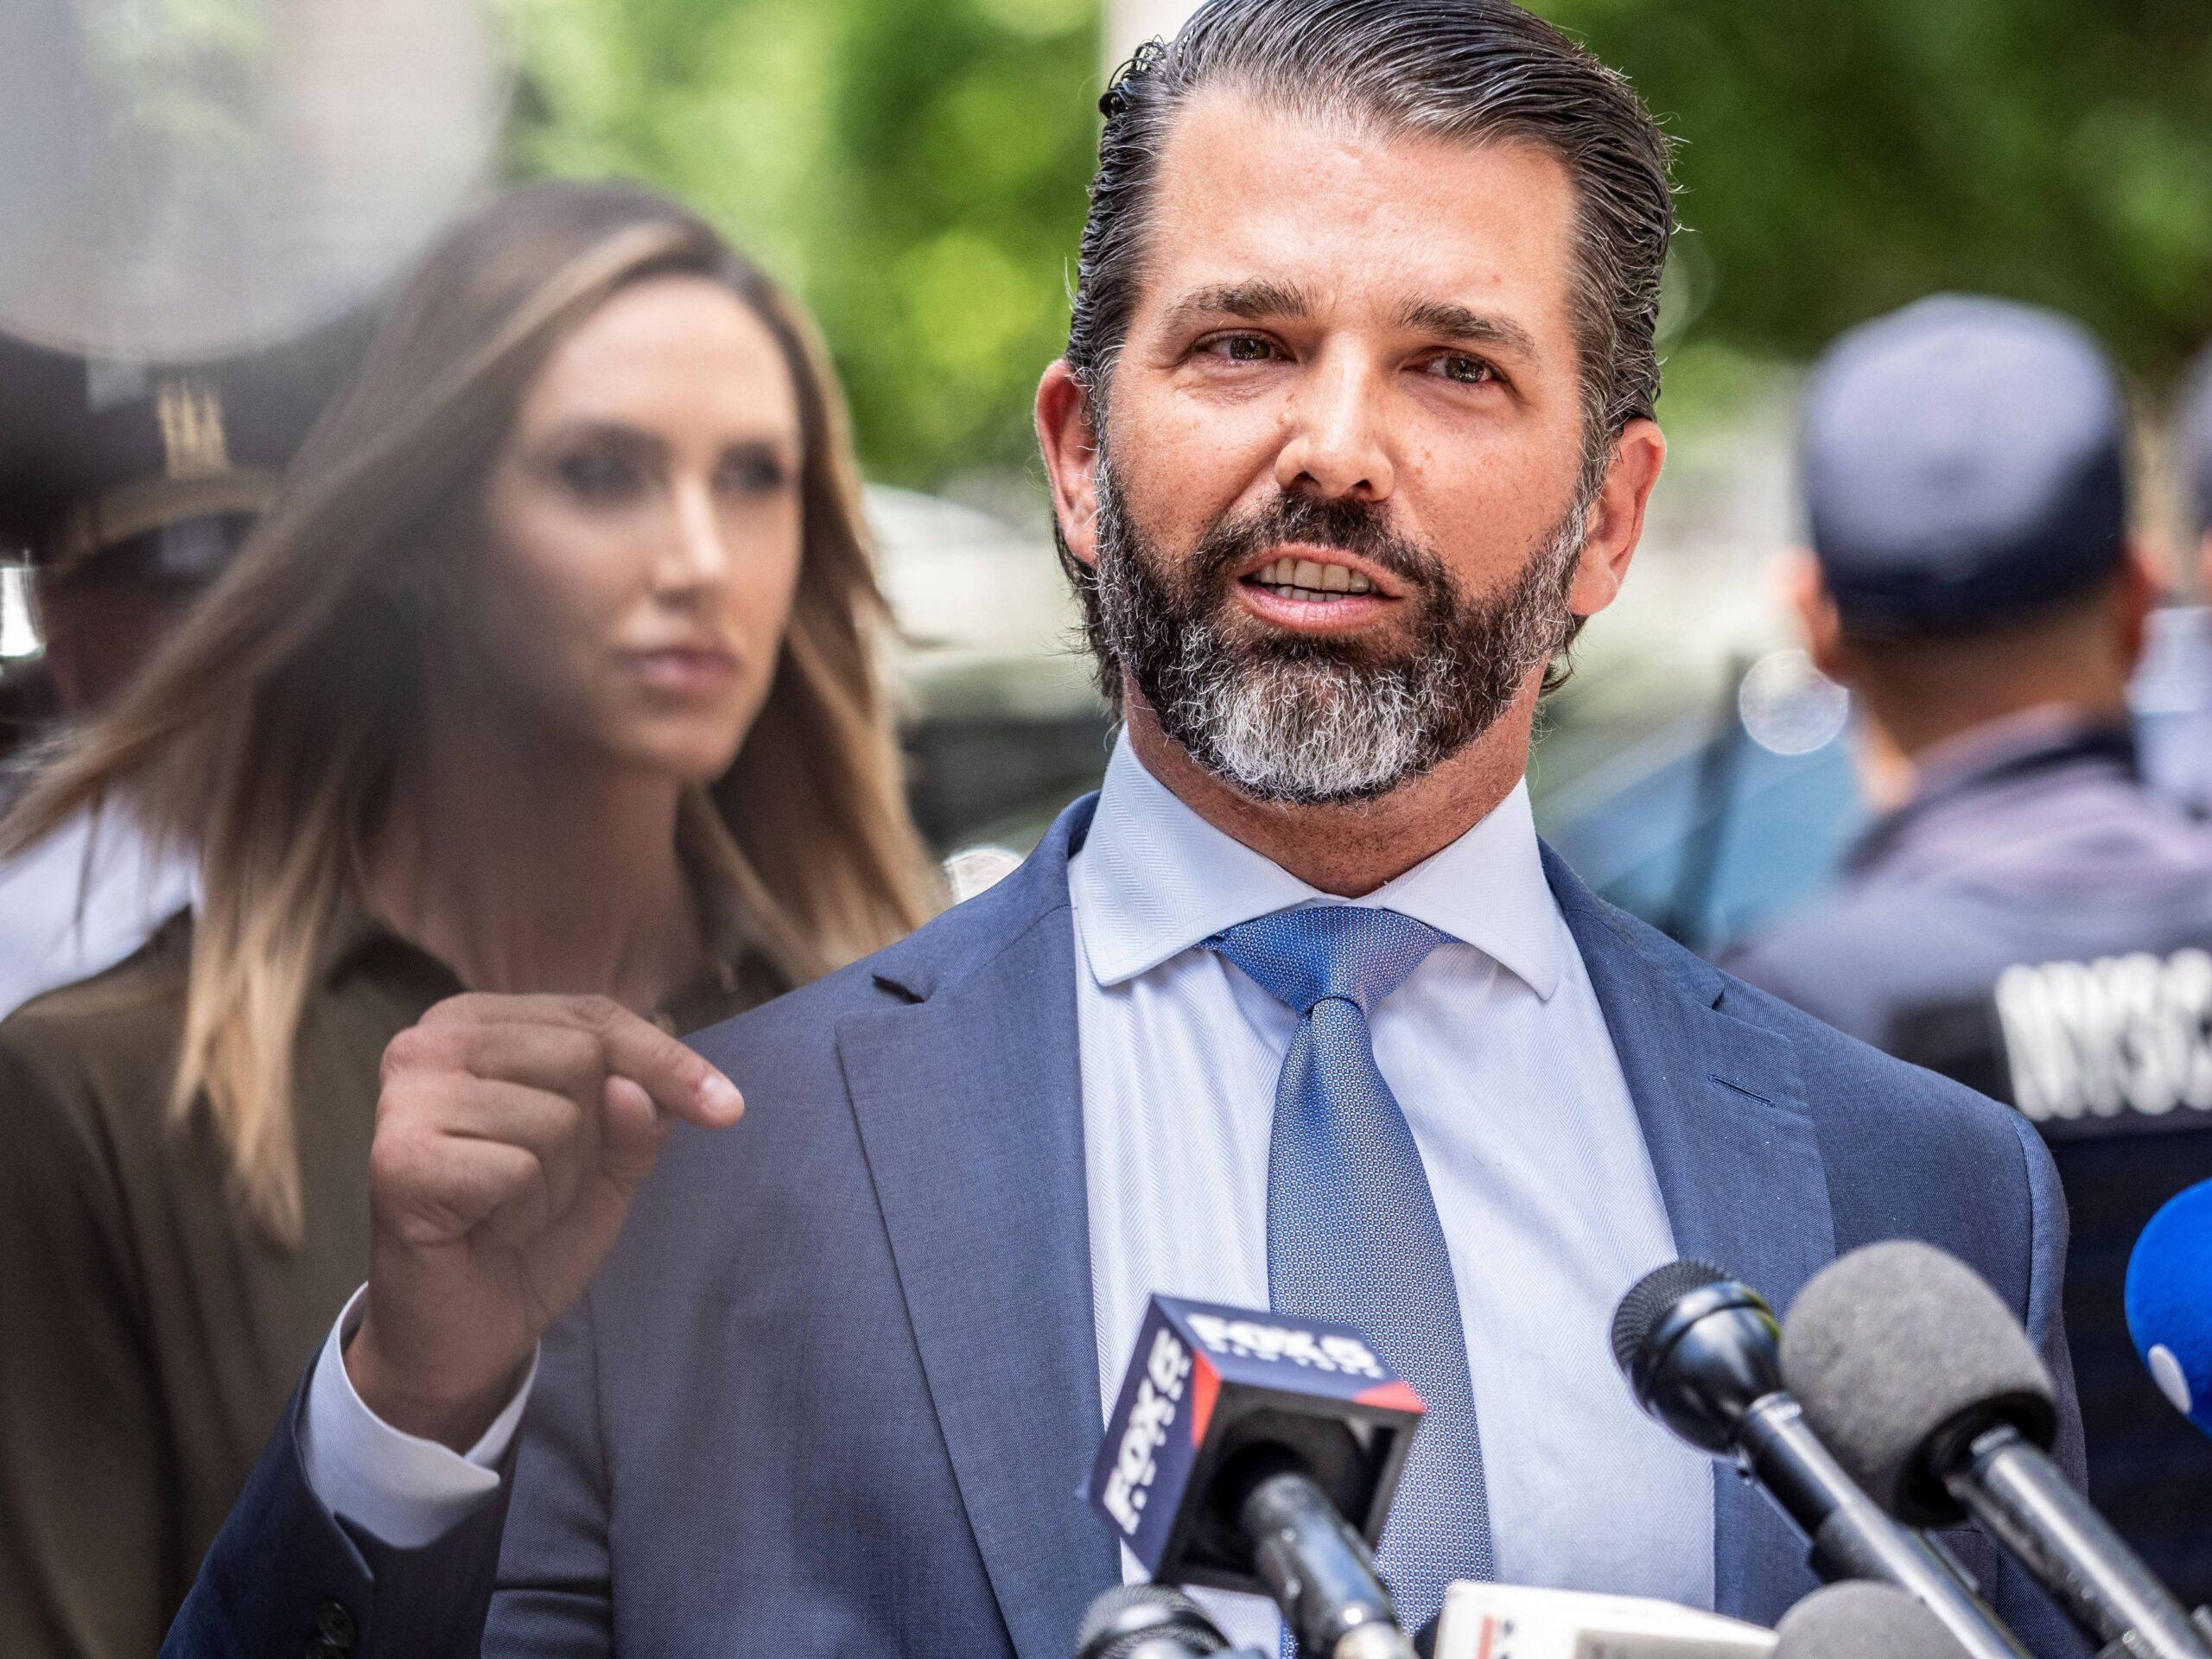 Donald Trump Jr. speaking to the press